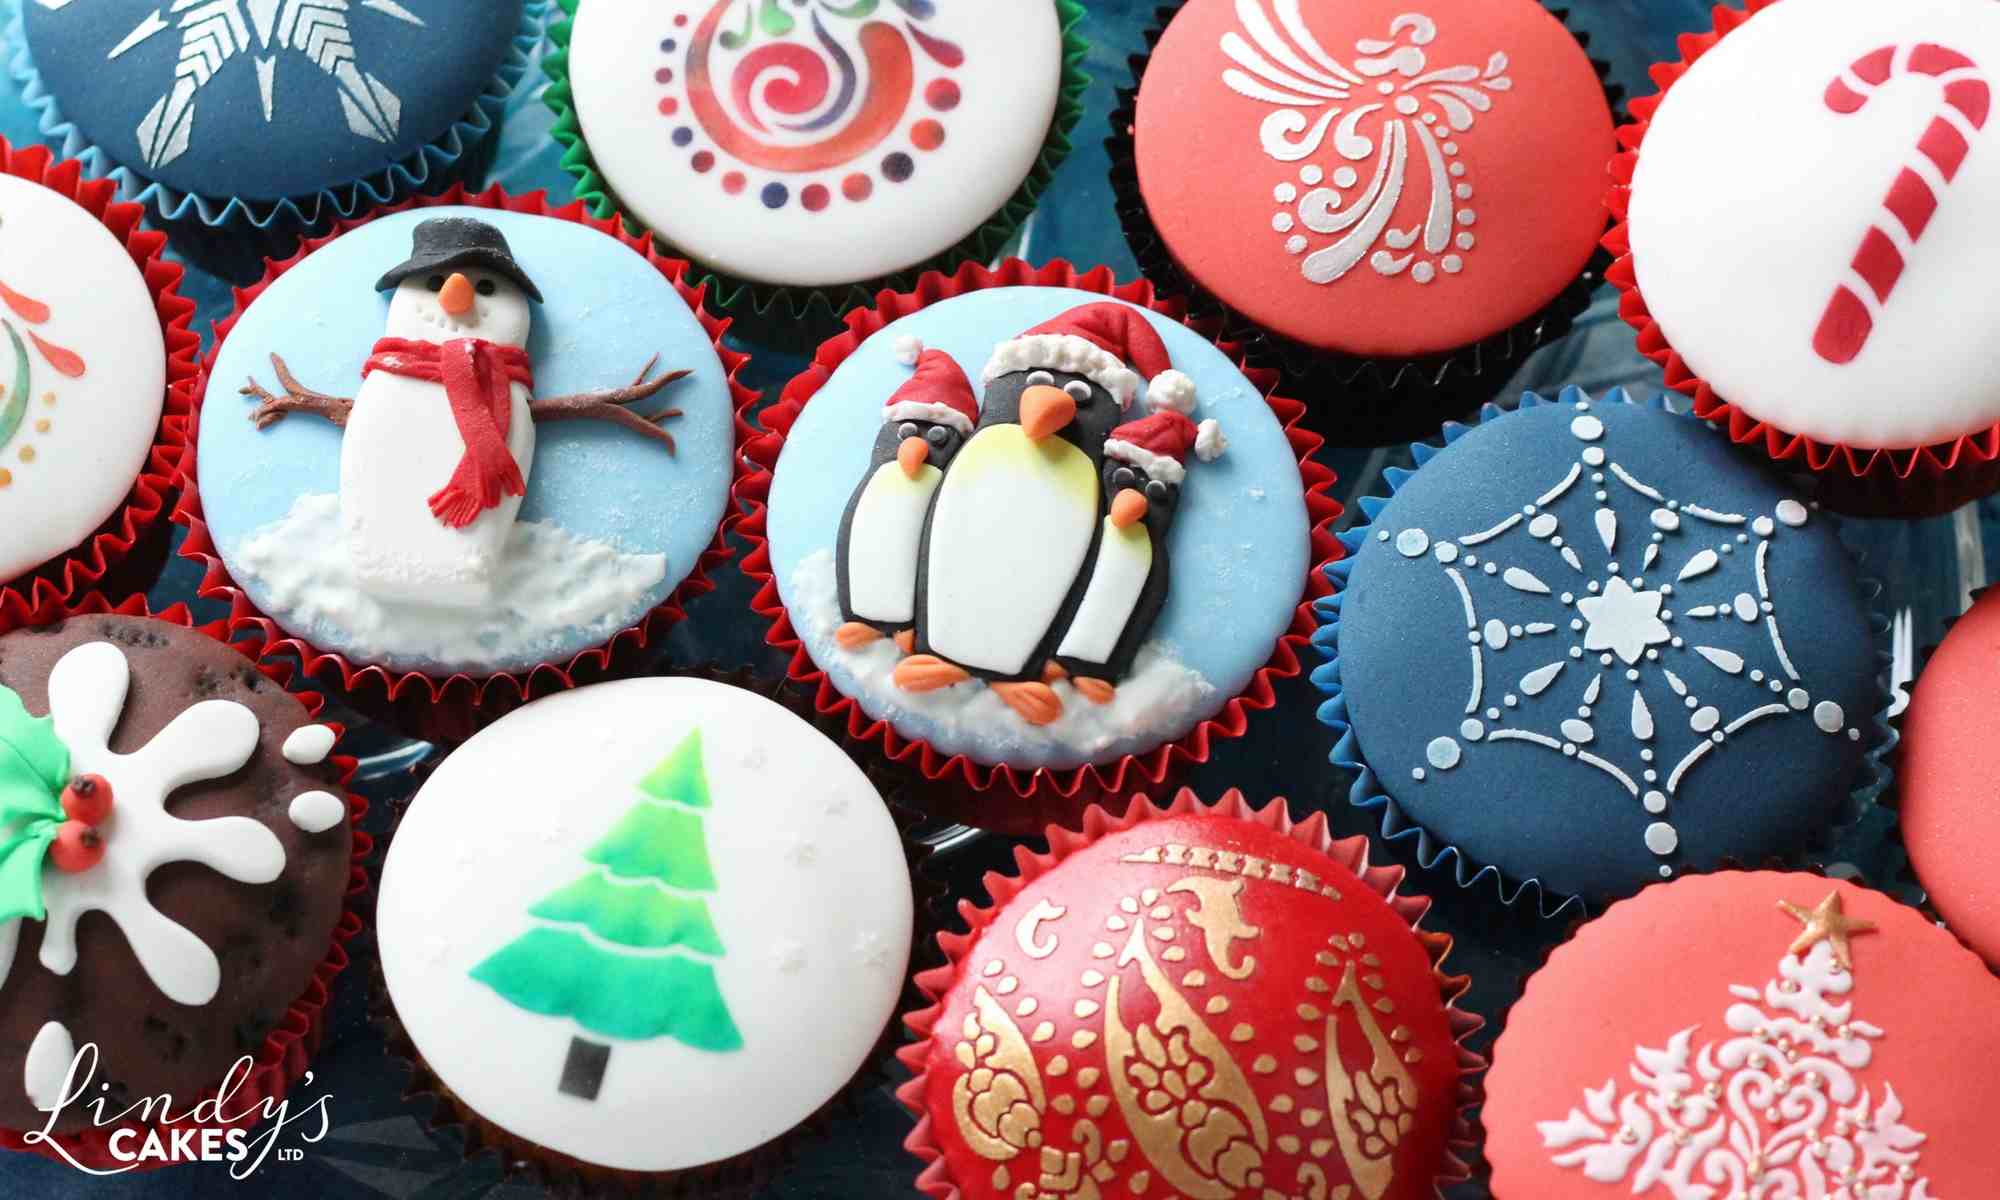 Christmas cupcakes to inspire you by Lindy Smith